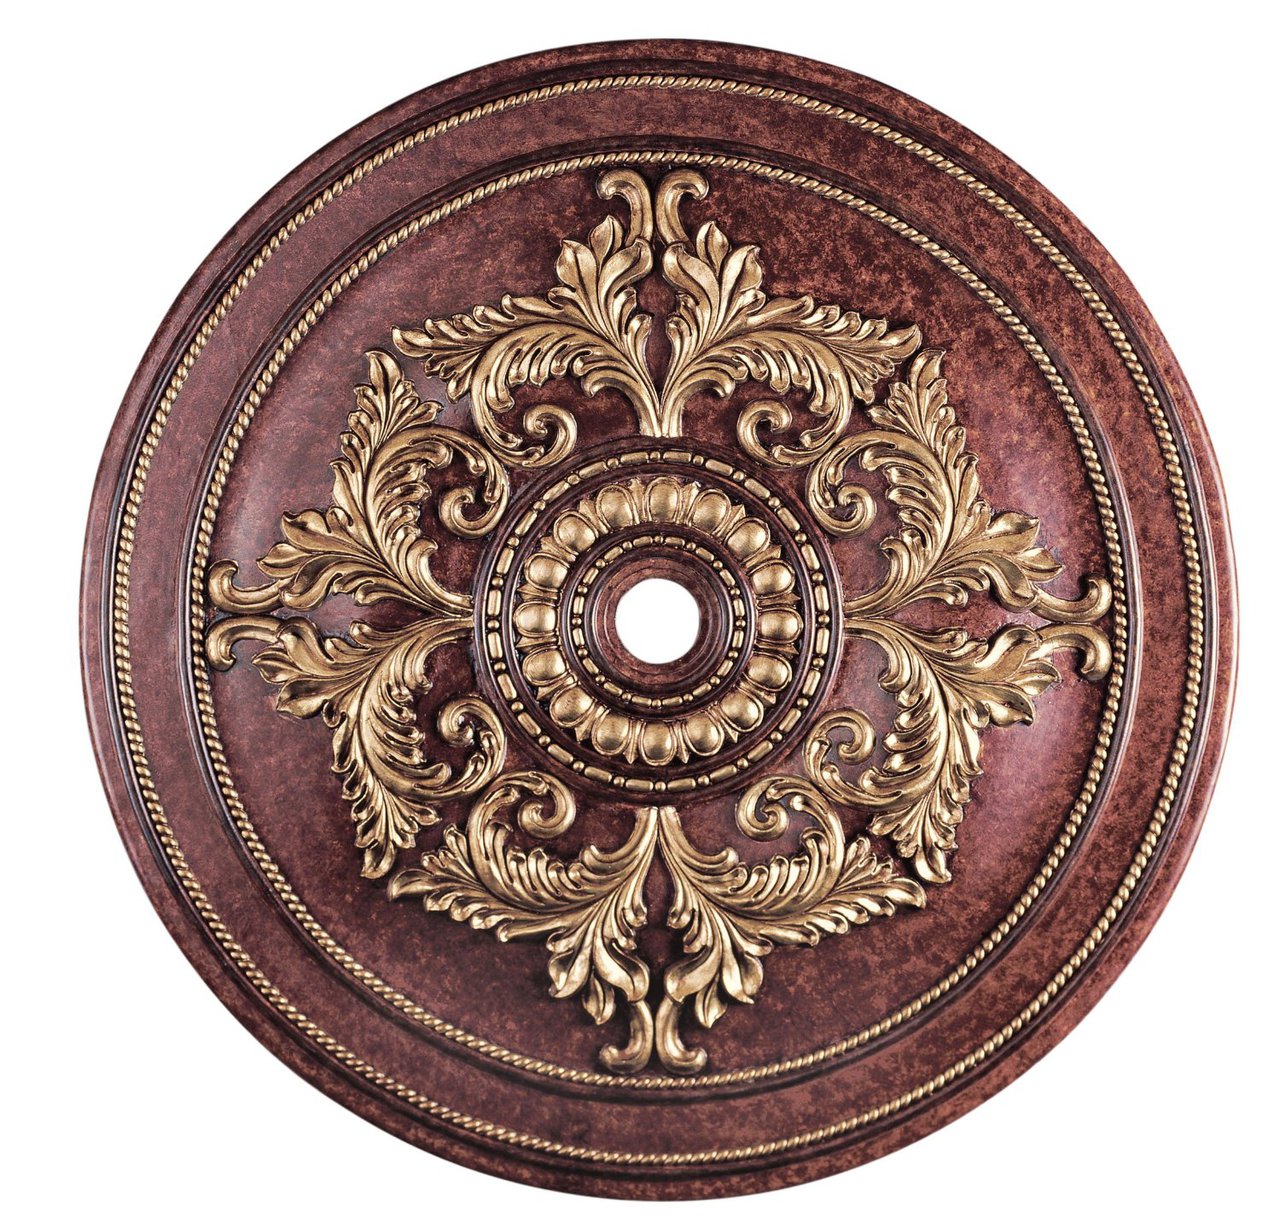 LIVEX Lighting 8229-63 Ceiling Medallion in Verona Bronze with Aged Gold Leaf Accents